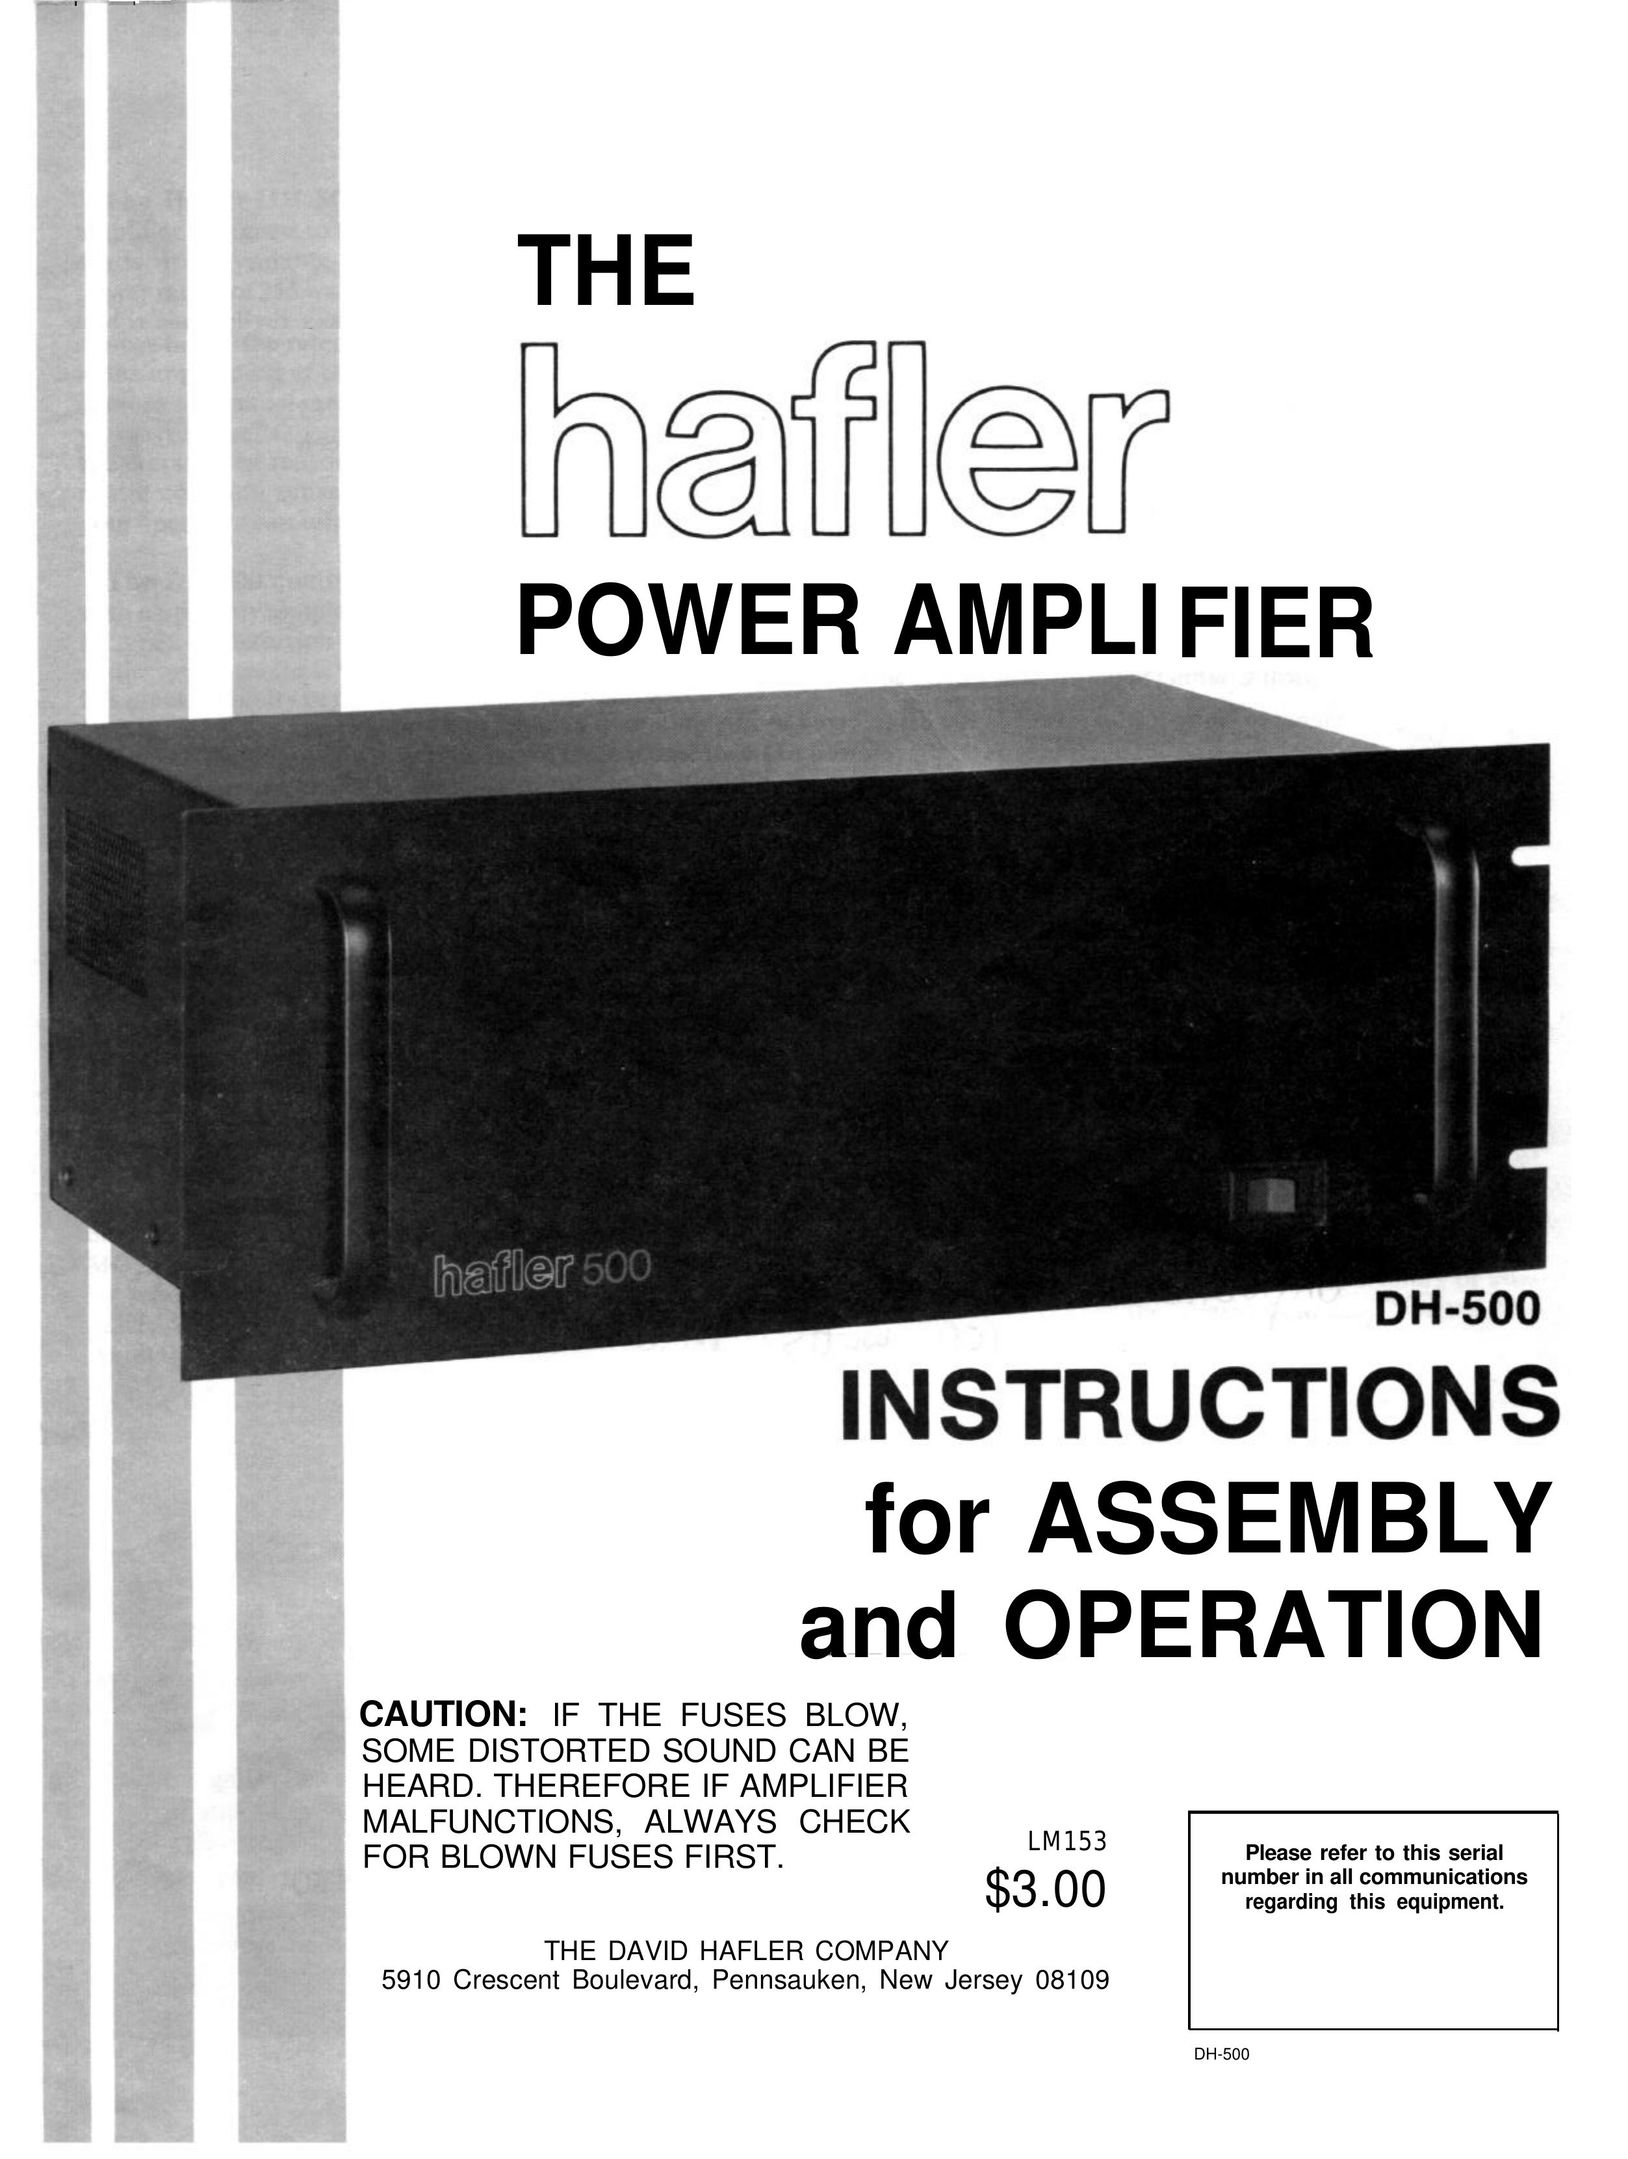 Hafler DH-500 Stereo Amplifier User Manual (Page 1)